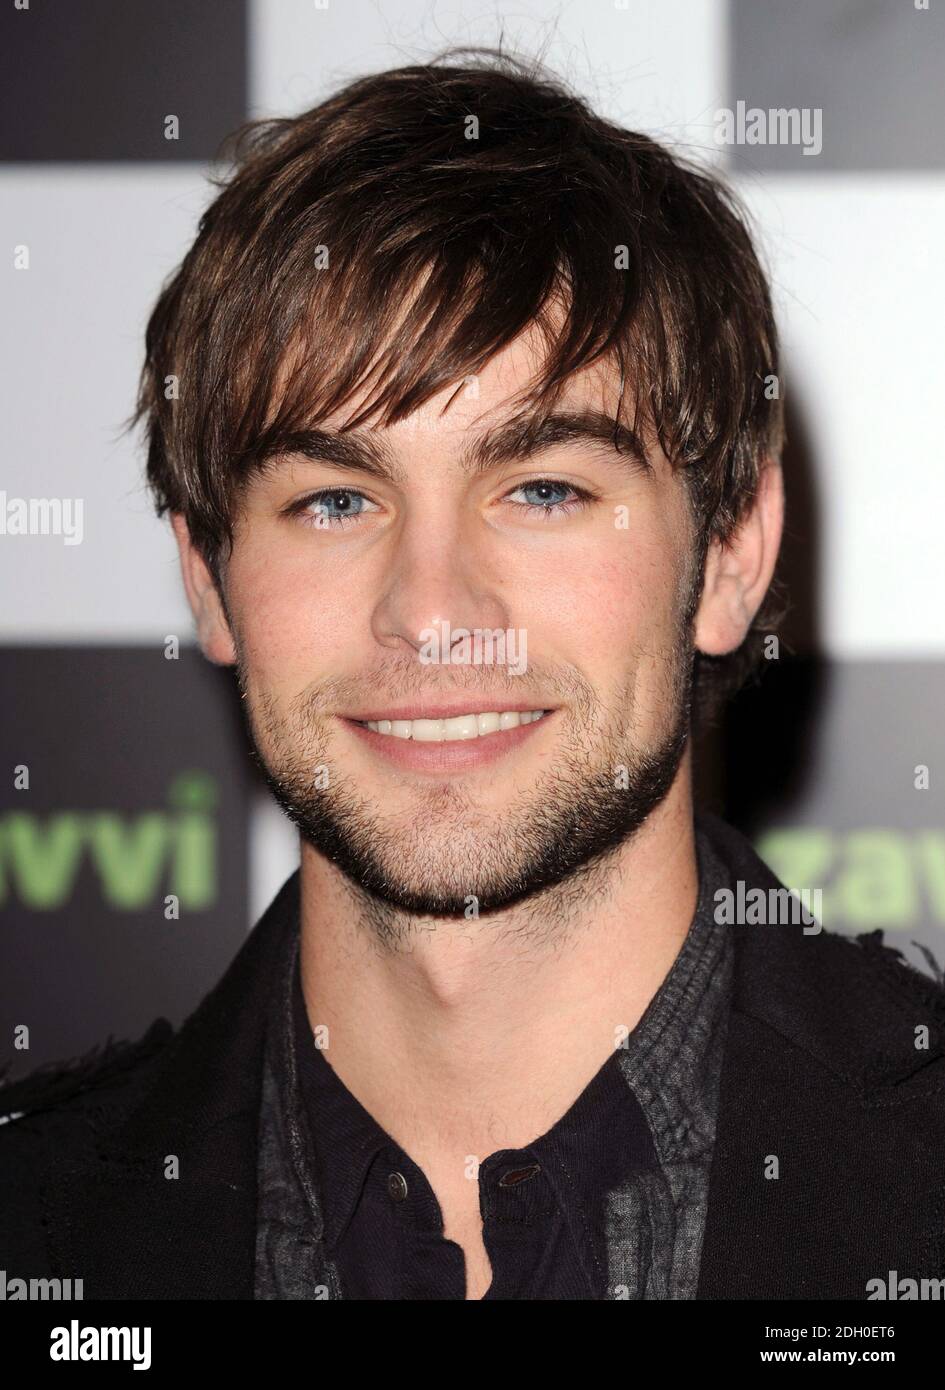 https://c8.alamy.com/comp/2DH0ET6/chace-crawford-signs-copies-of-the-gossip-girl-series-dvd-at-zavvi-on-oxford-street-in-central-london-2DH0ET6.jpg